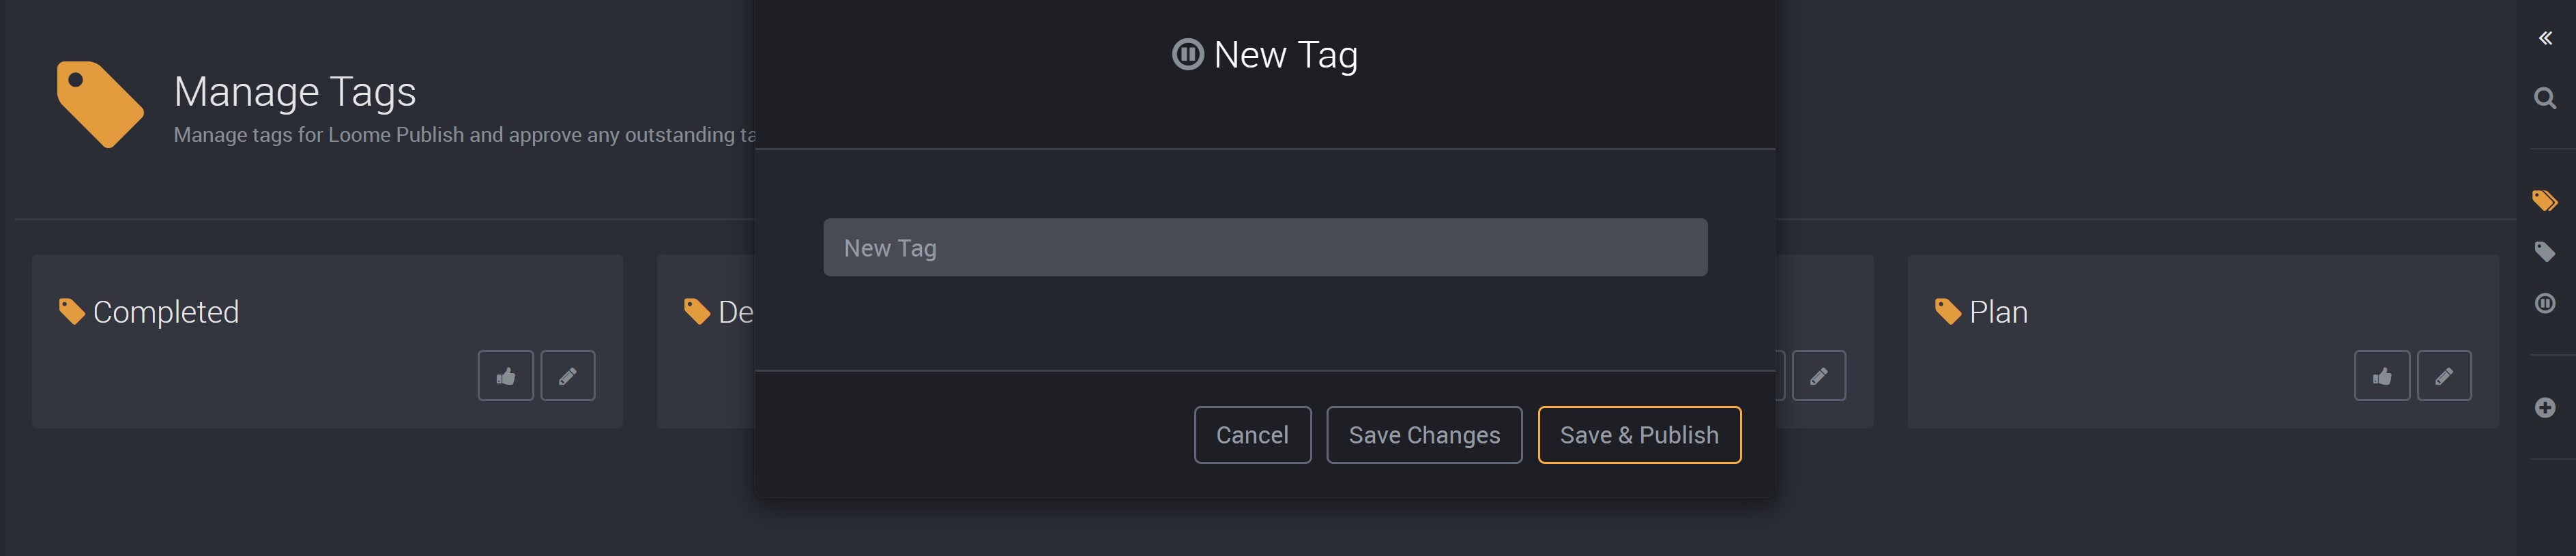 New tag view